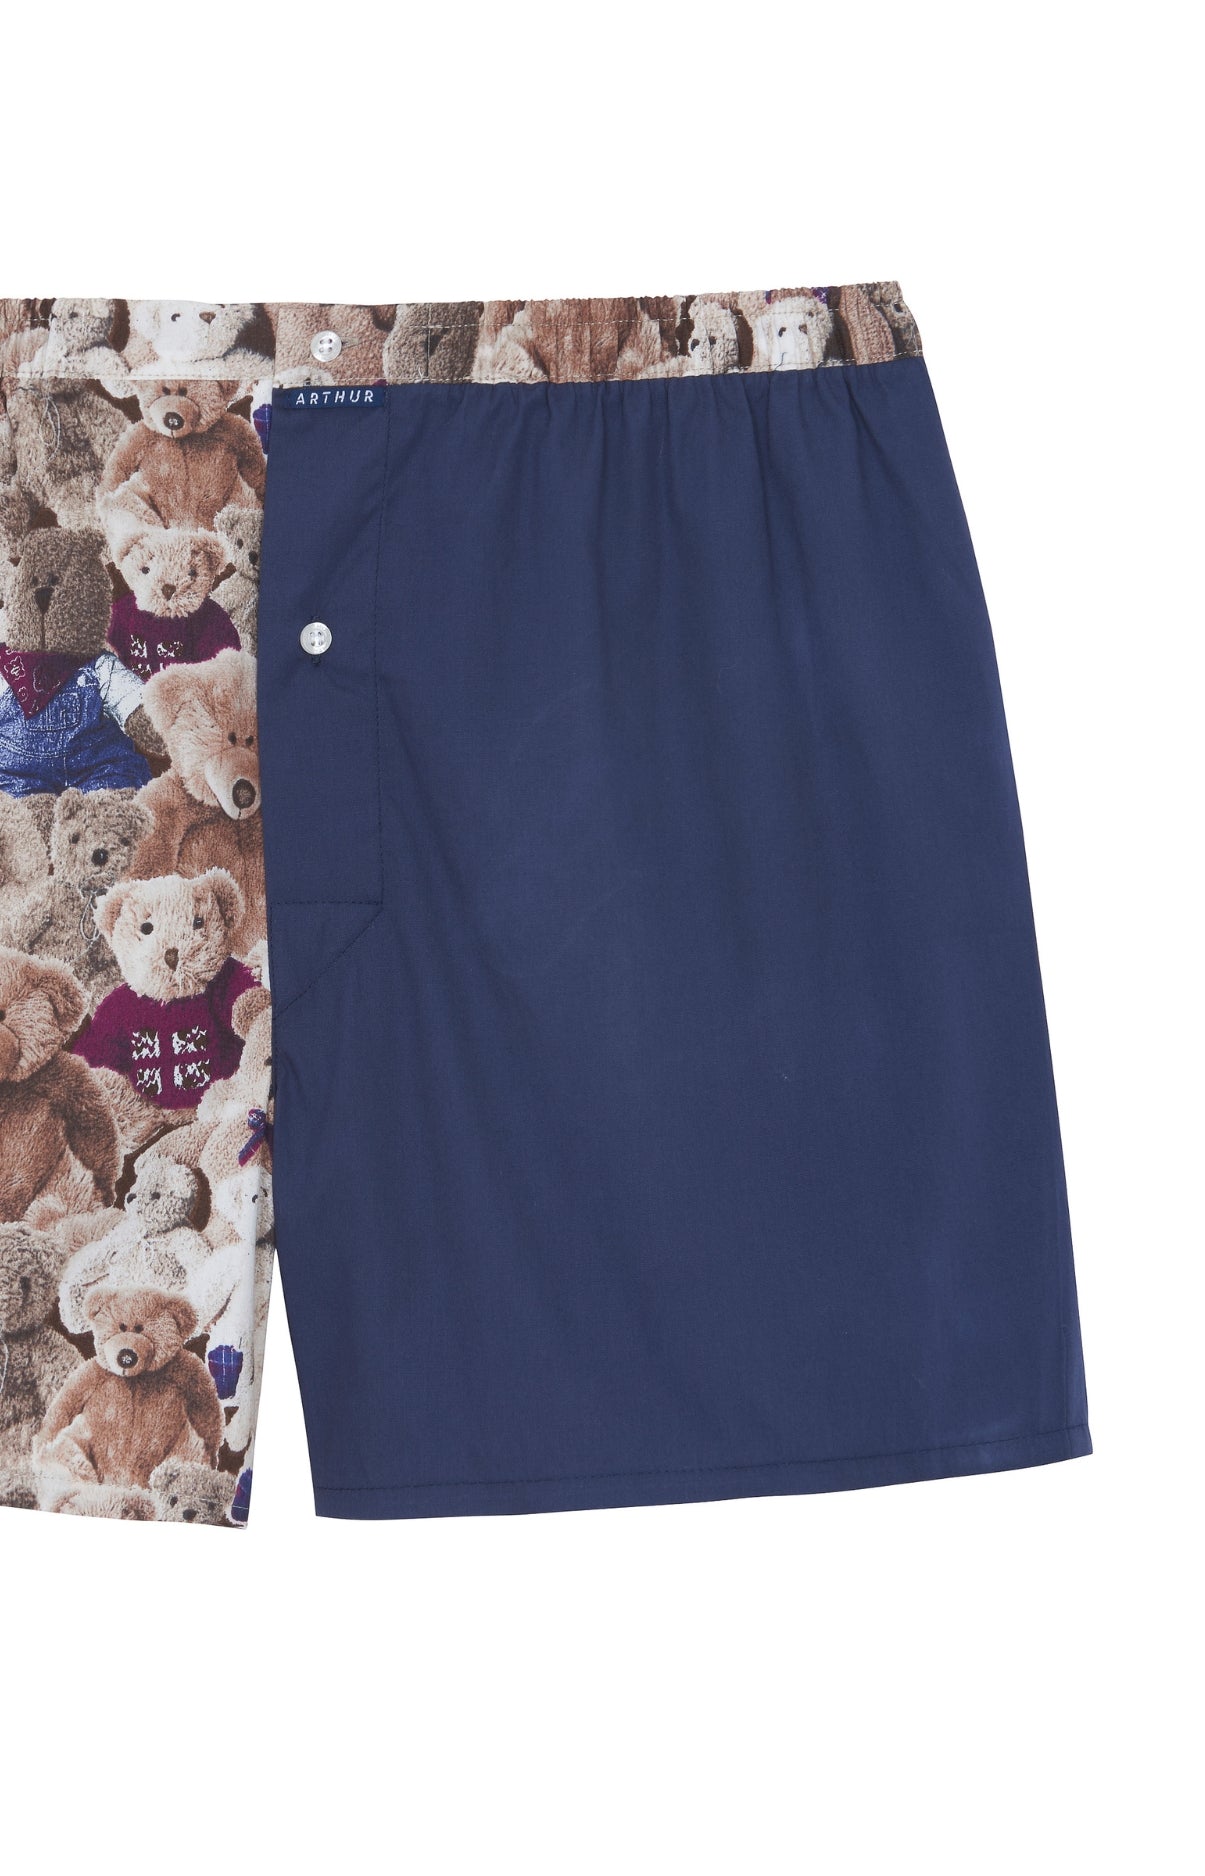 Classic boxer shorts - Upcycled Teddy